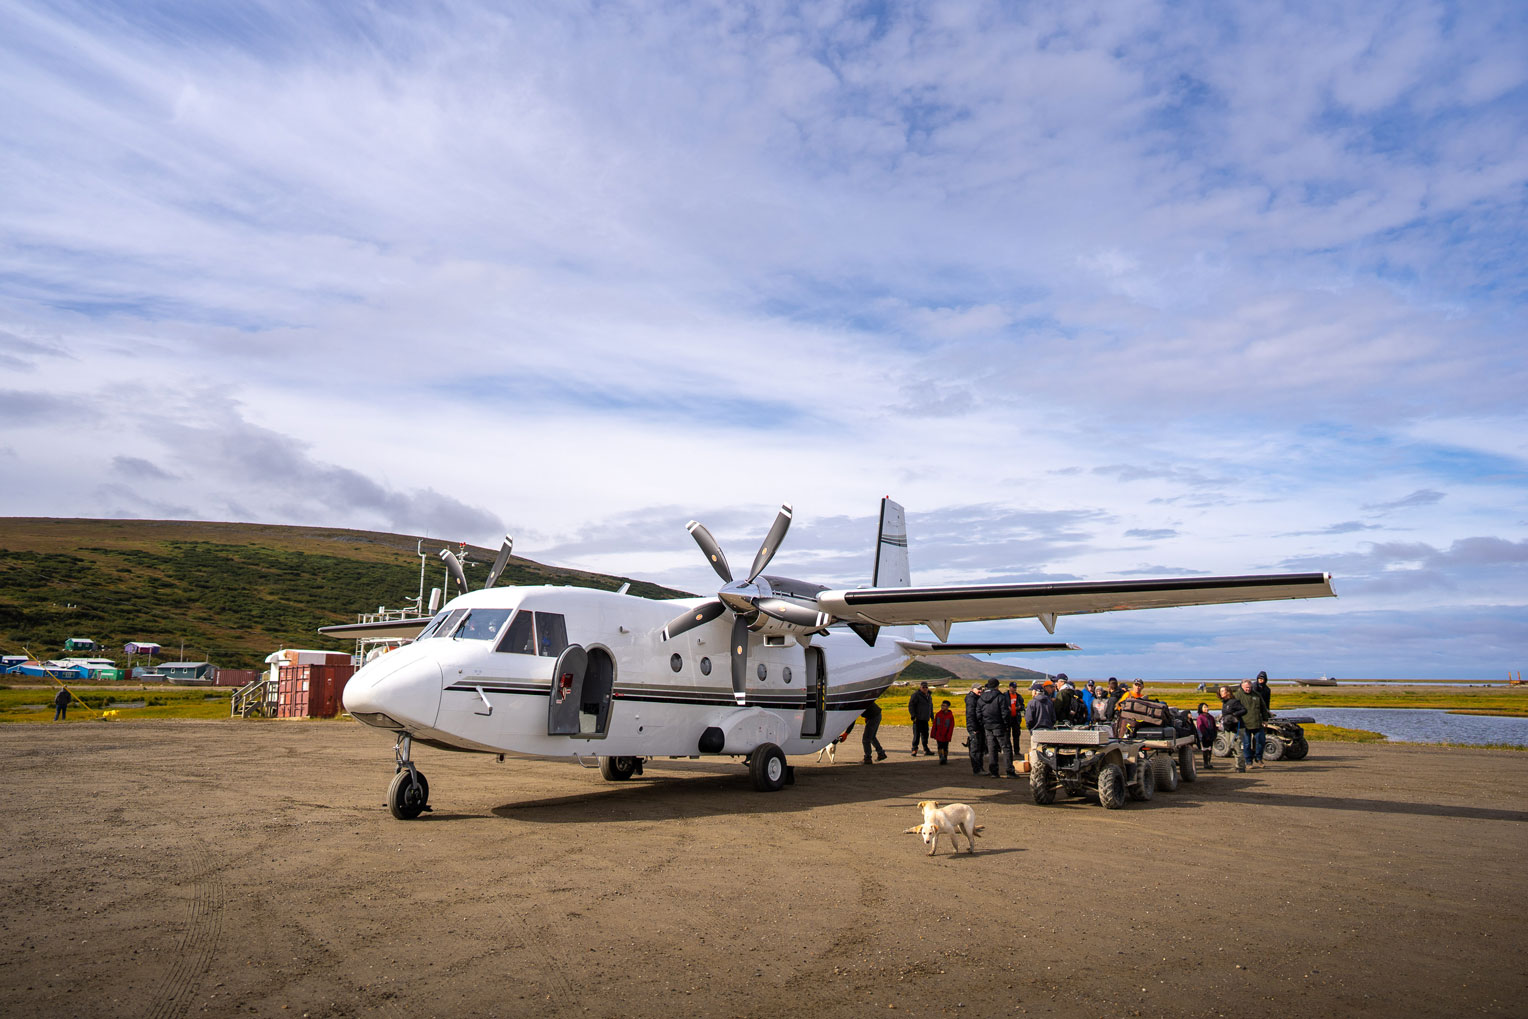 Teams unload materials from our CASA aircraft at one of the remote villages.